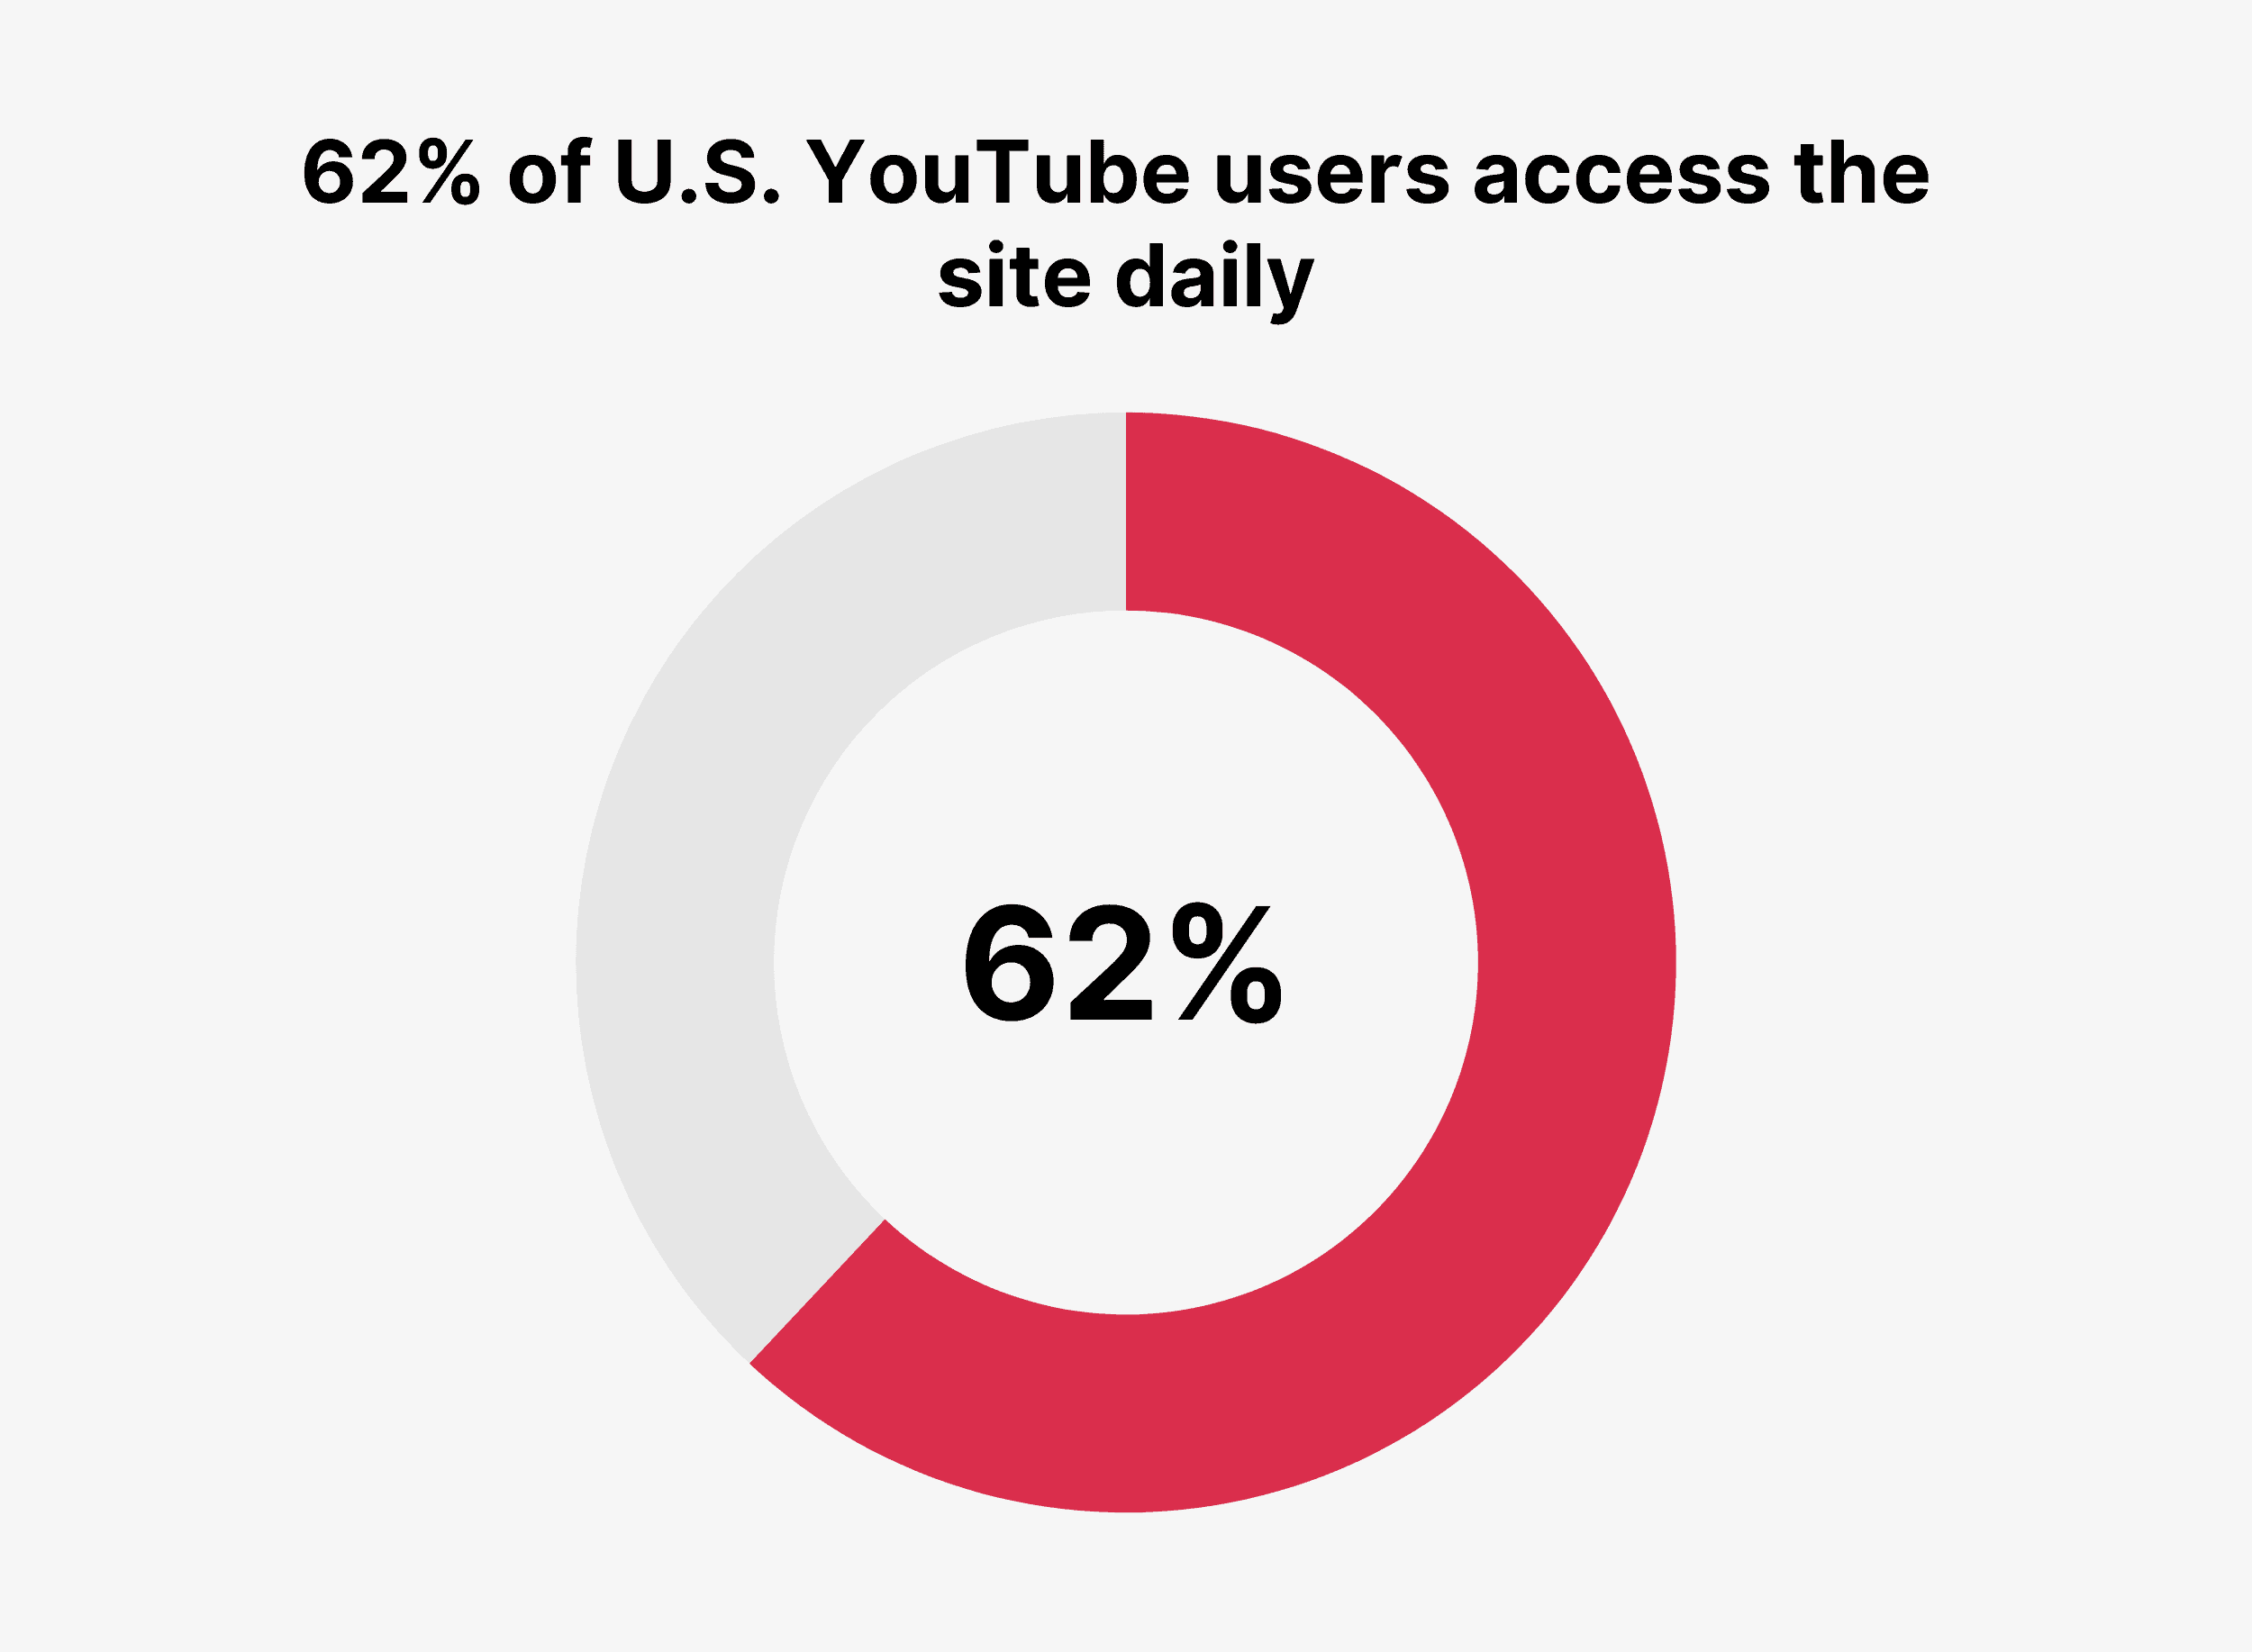 62% of U.S. YouTube users access the site daily